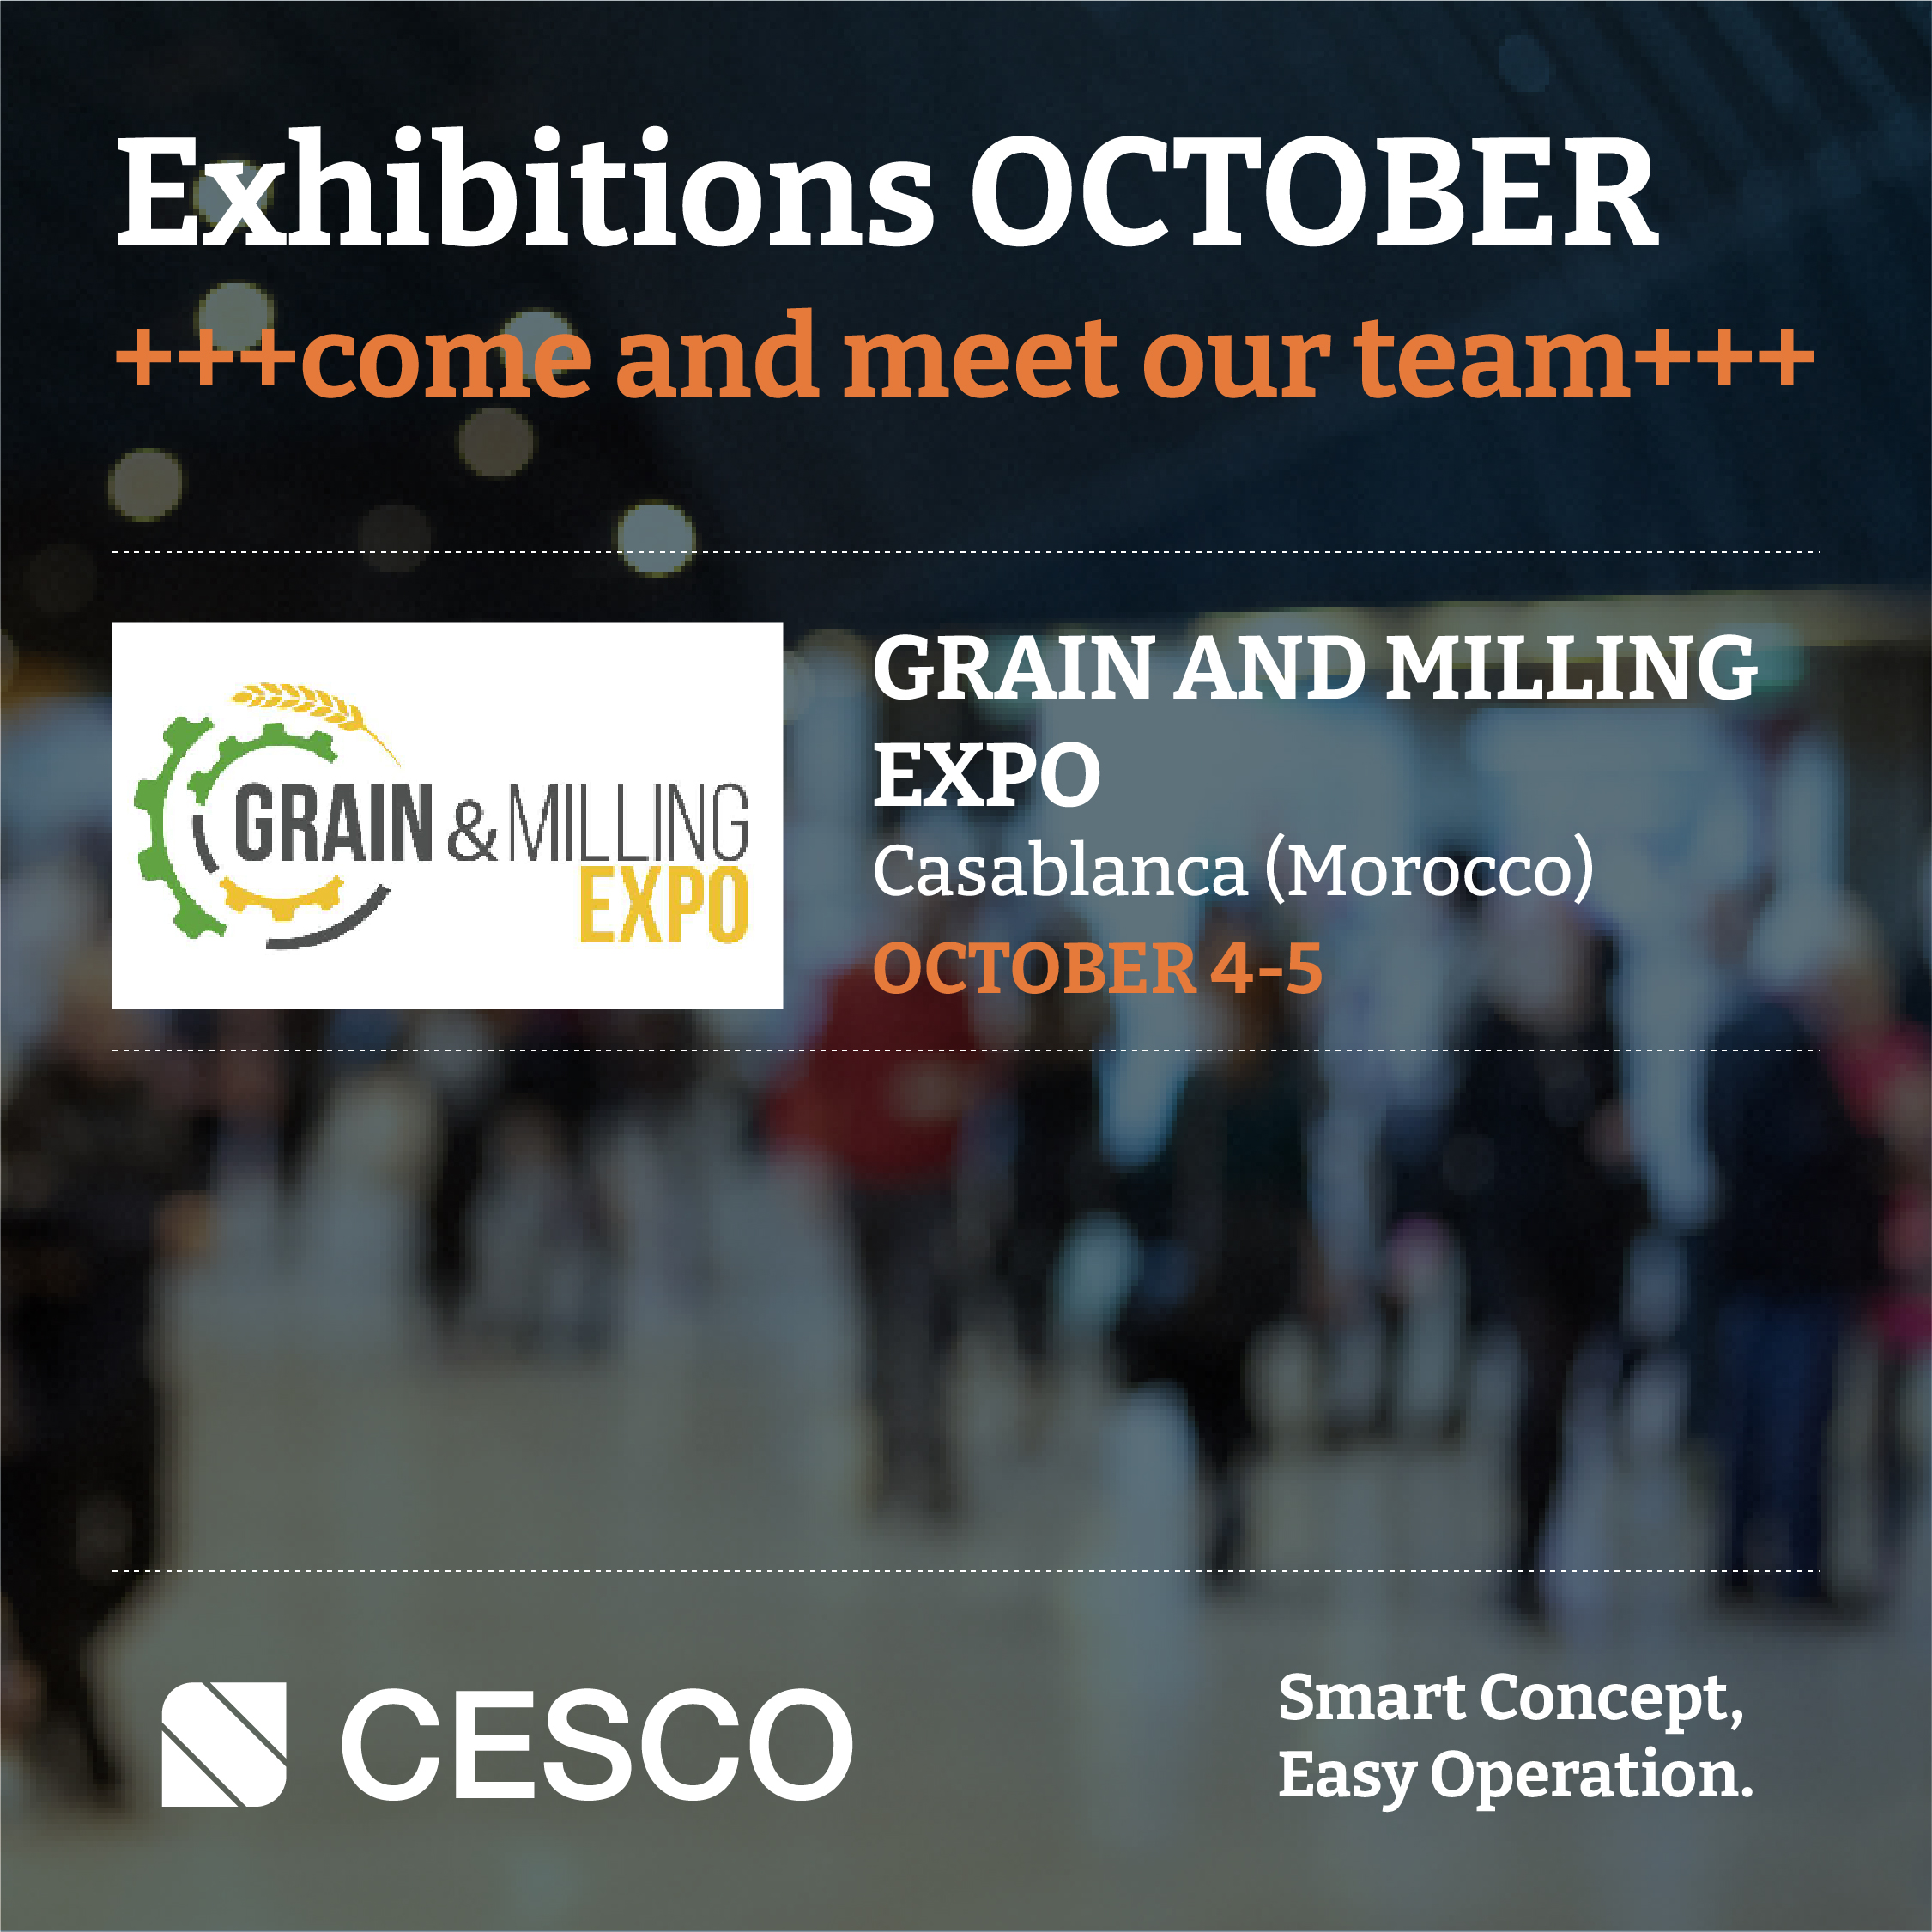 CESCO will be present at the Grain & Milling Expo